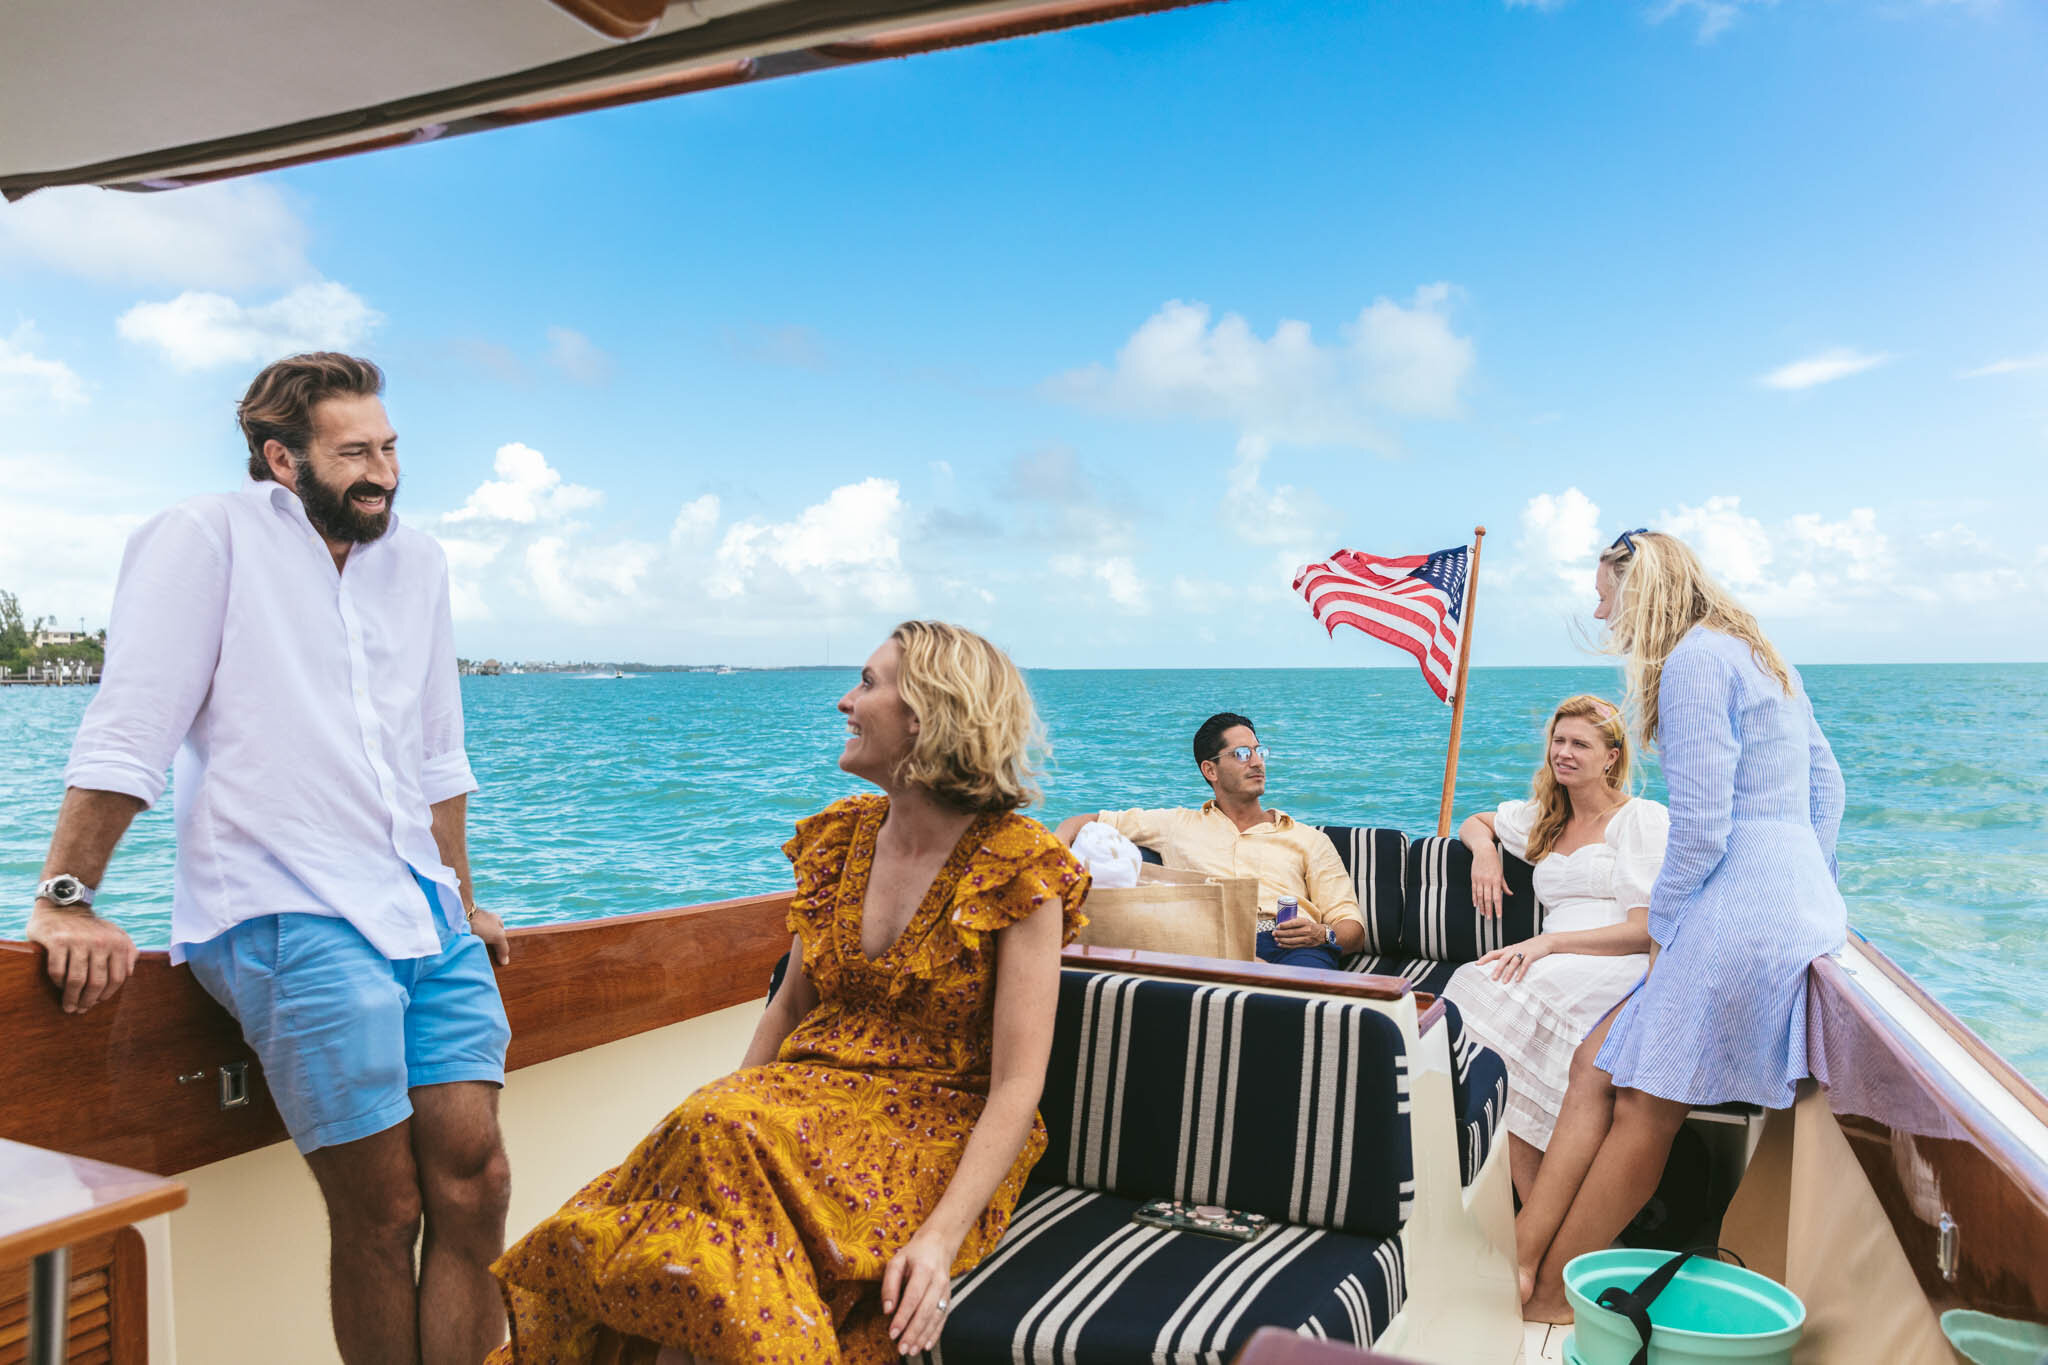  Group Of Friends And Family Aboard A Boat In The Crystal Blue Atlantic Ocean By The Islands Of Islamorada In Florida. 